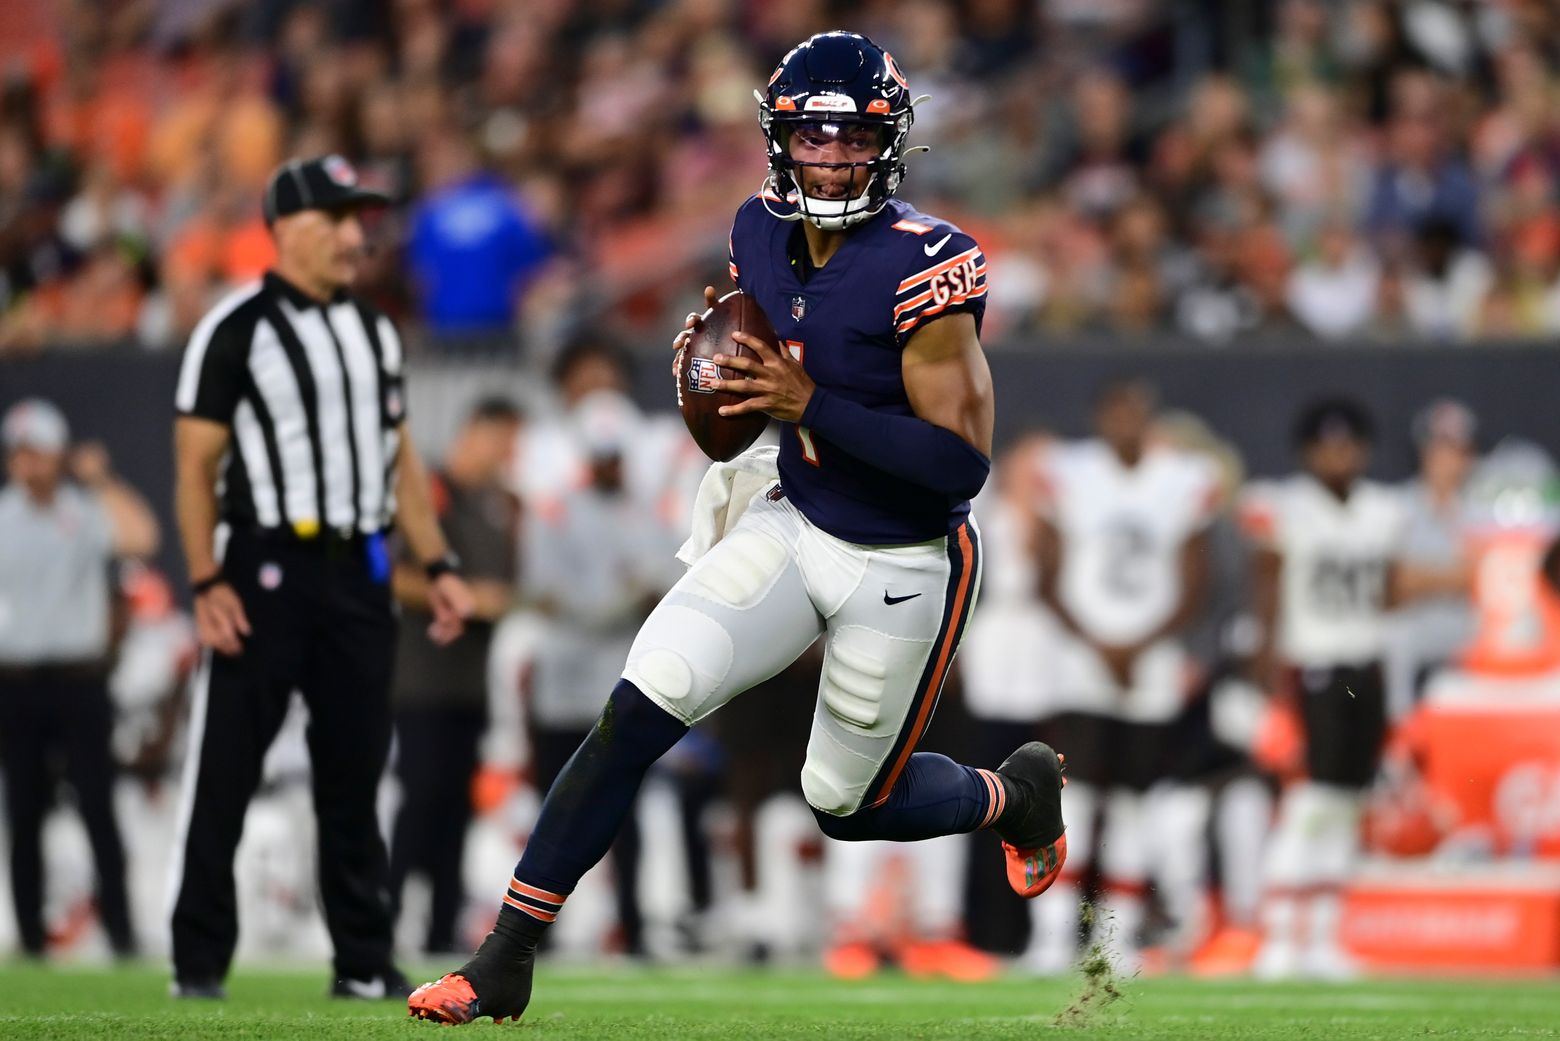 Fields hopes offseason work leads to jump for him, Bears